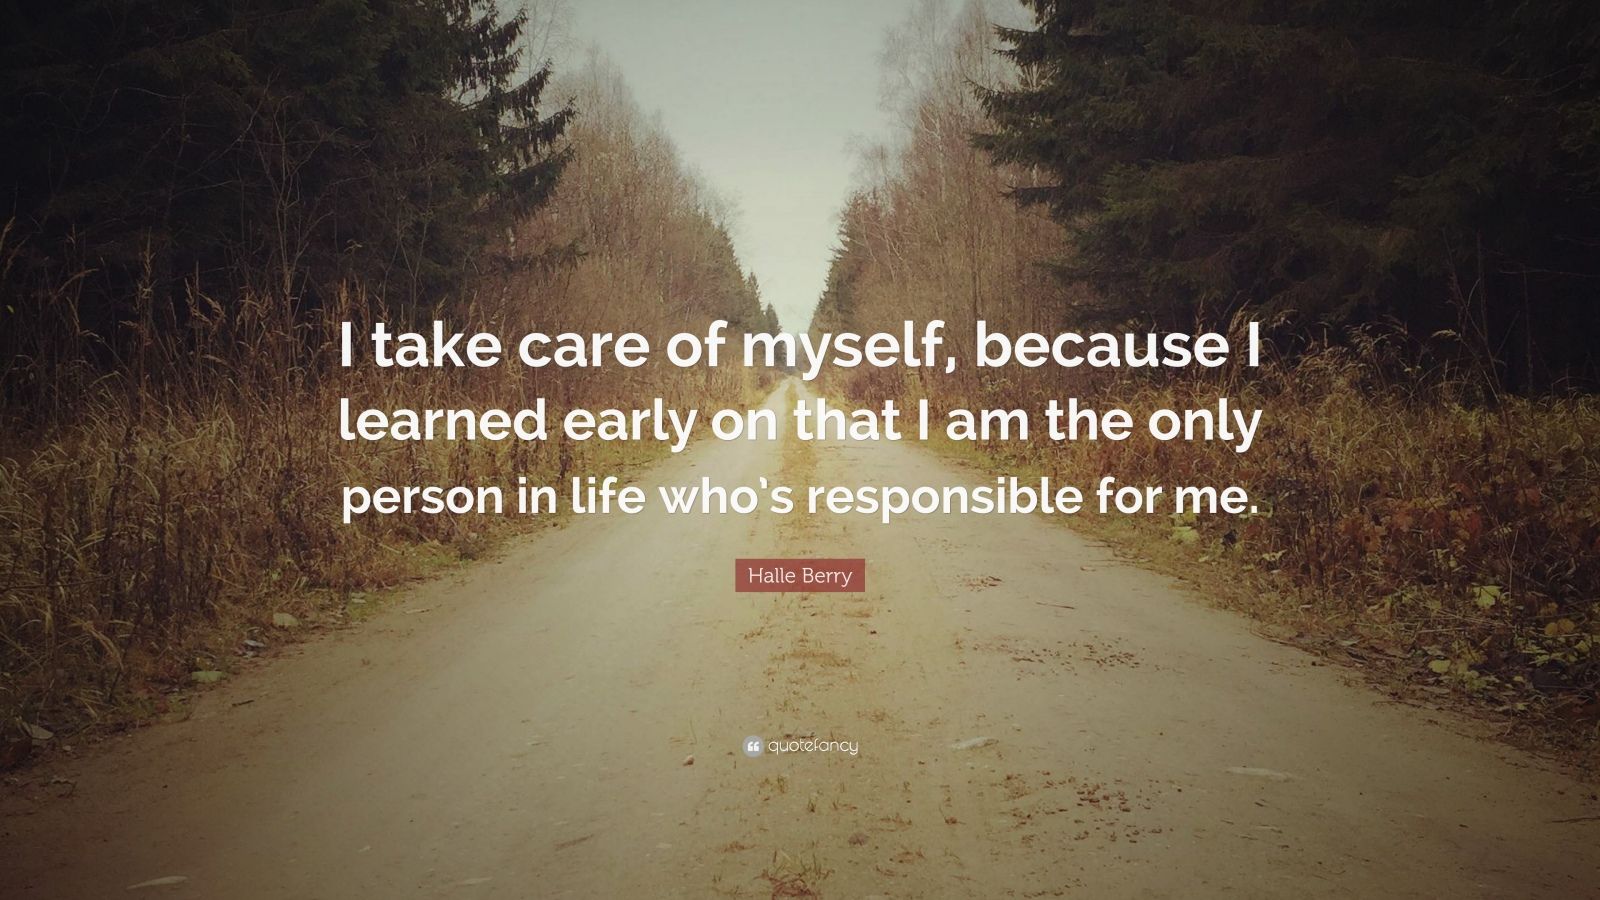 Halle Berry Quote: “I take care of myself, because I learned early on